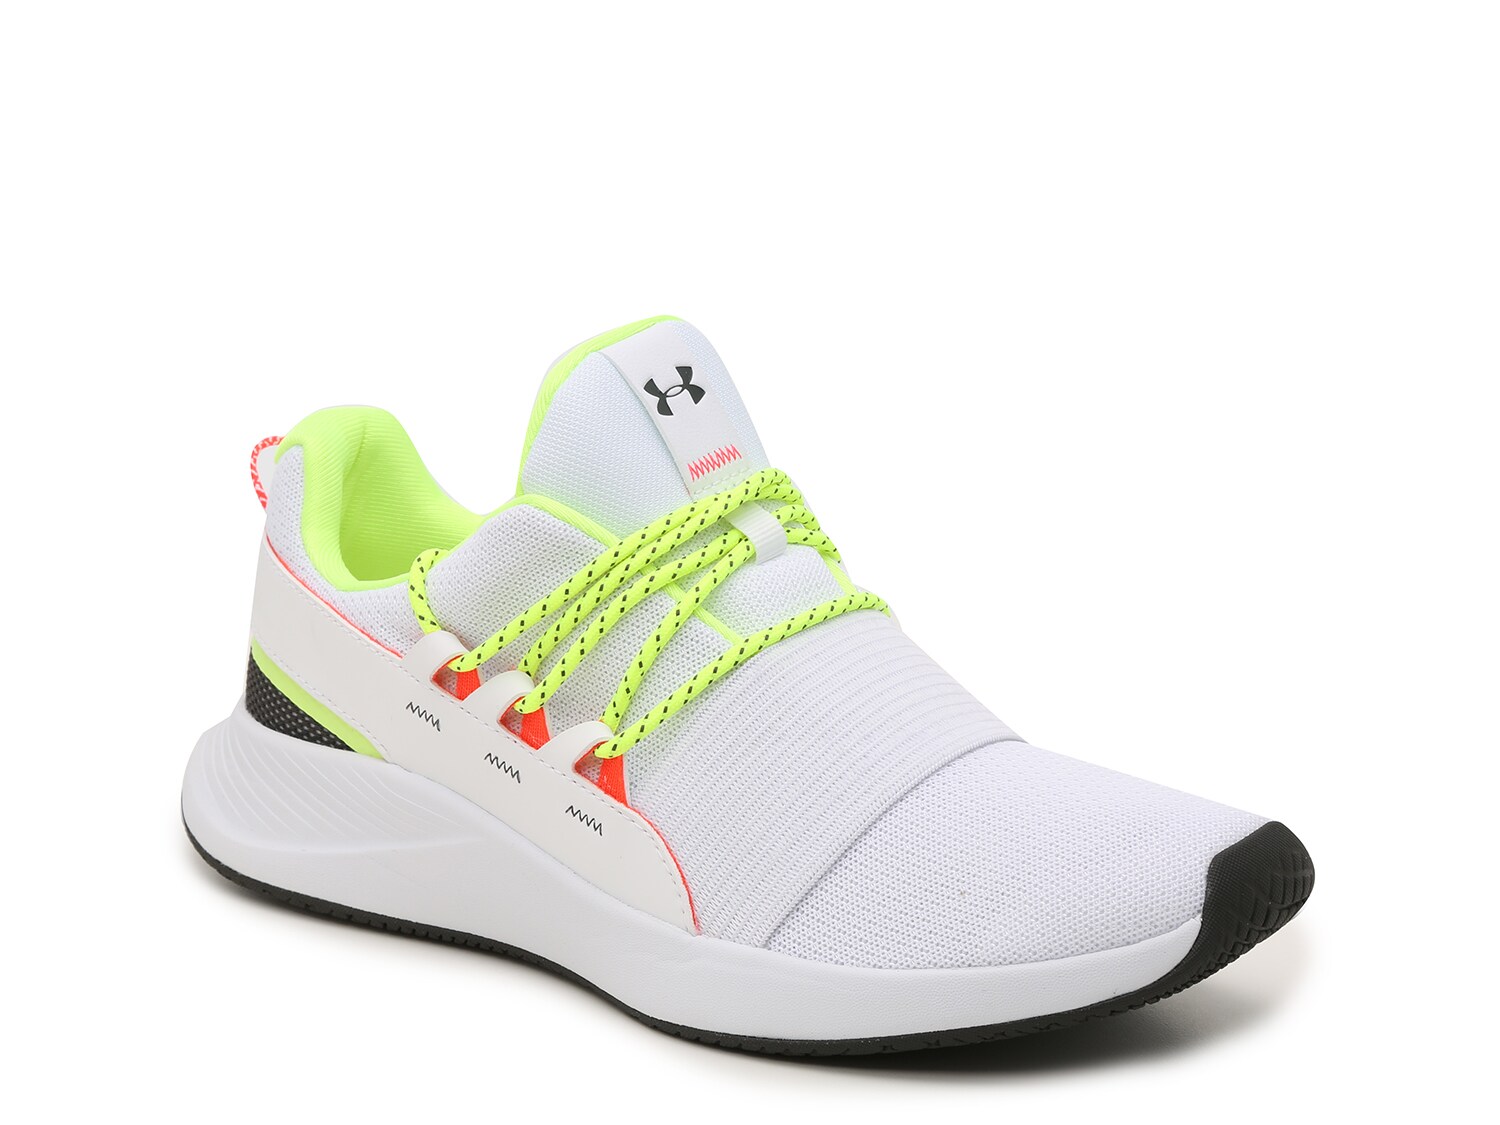 under armour tieless shoes